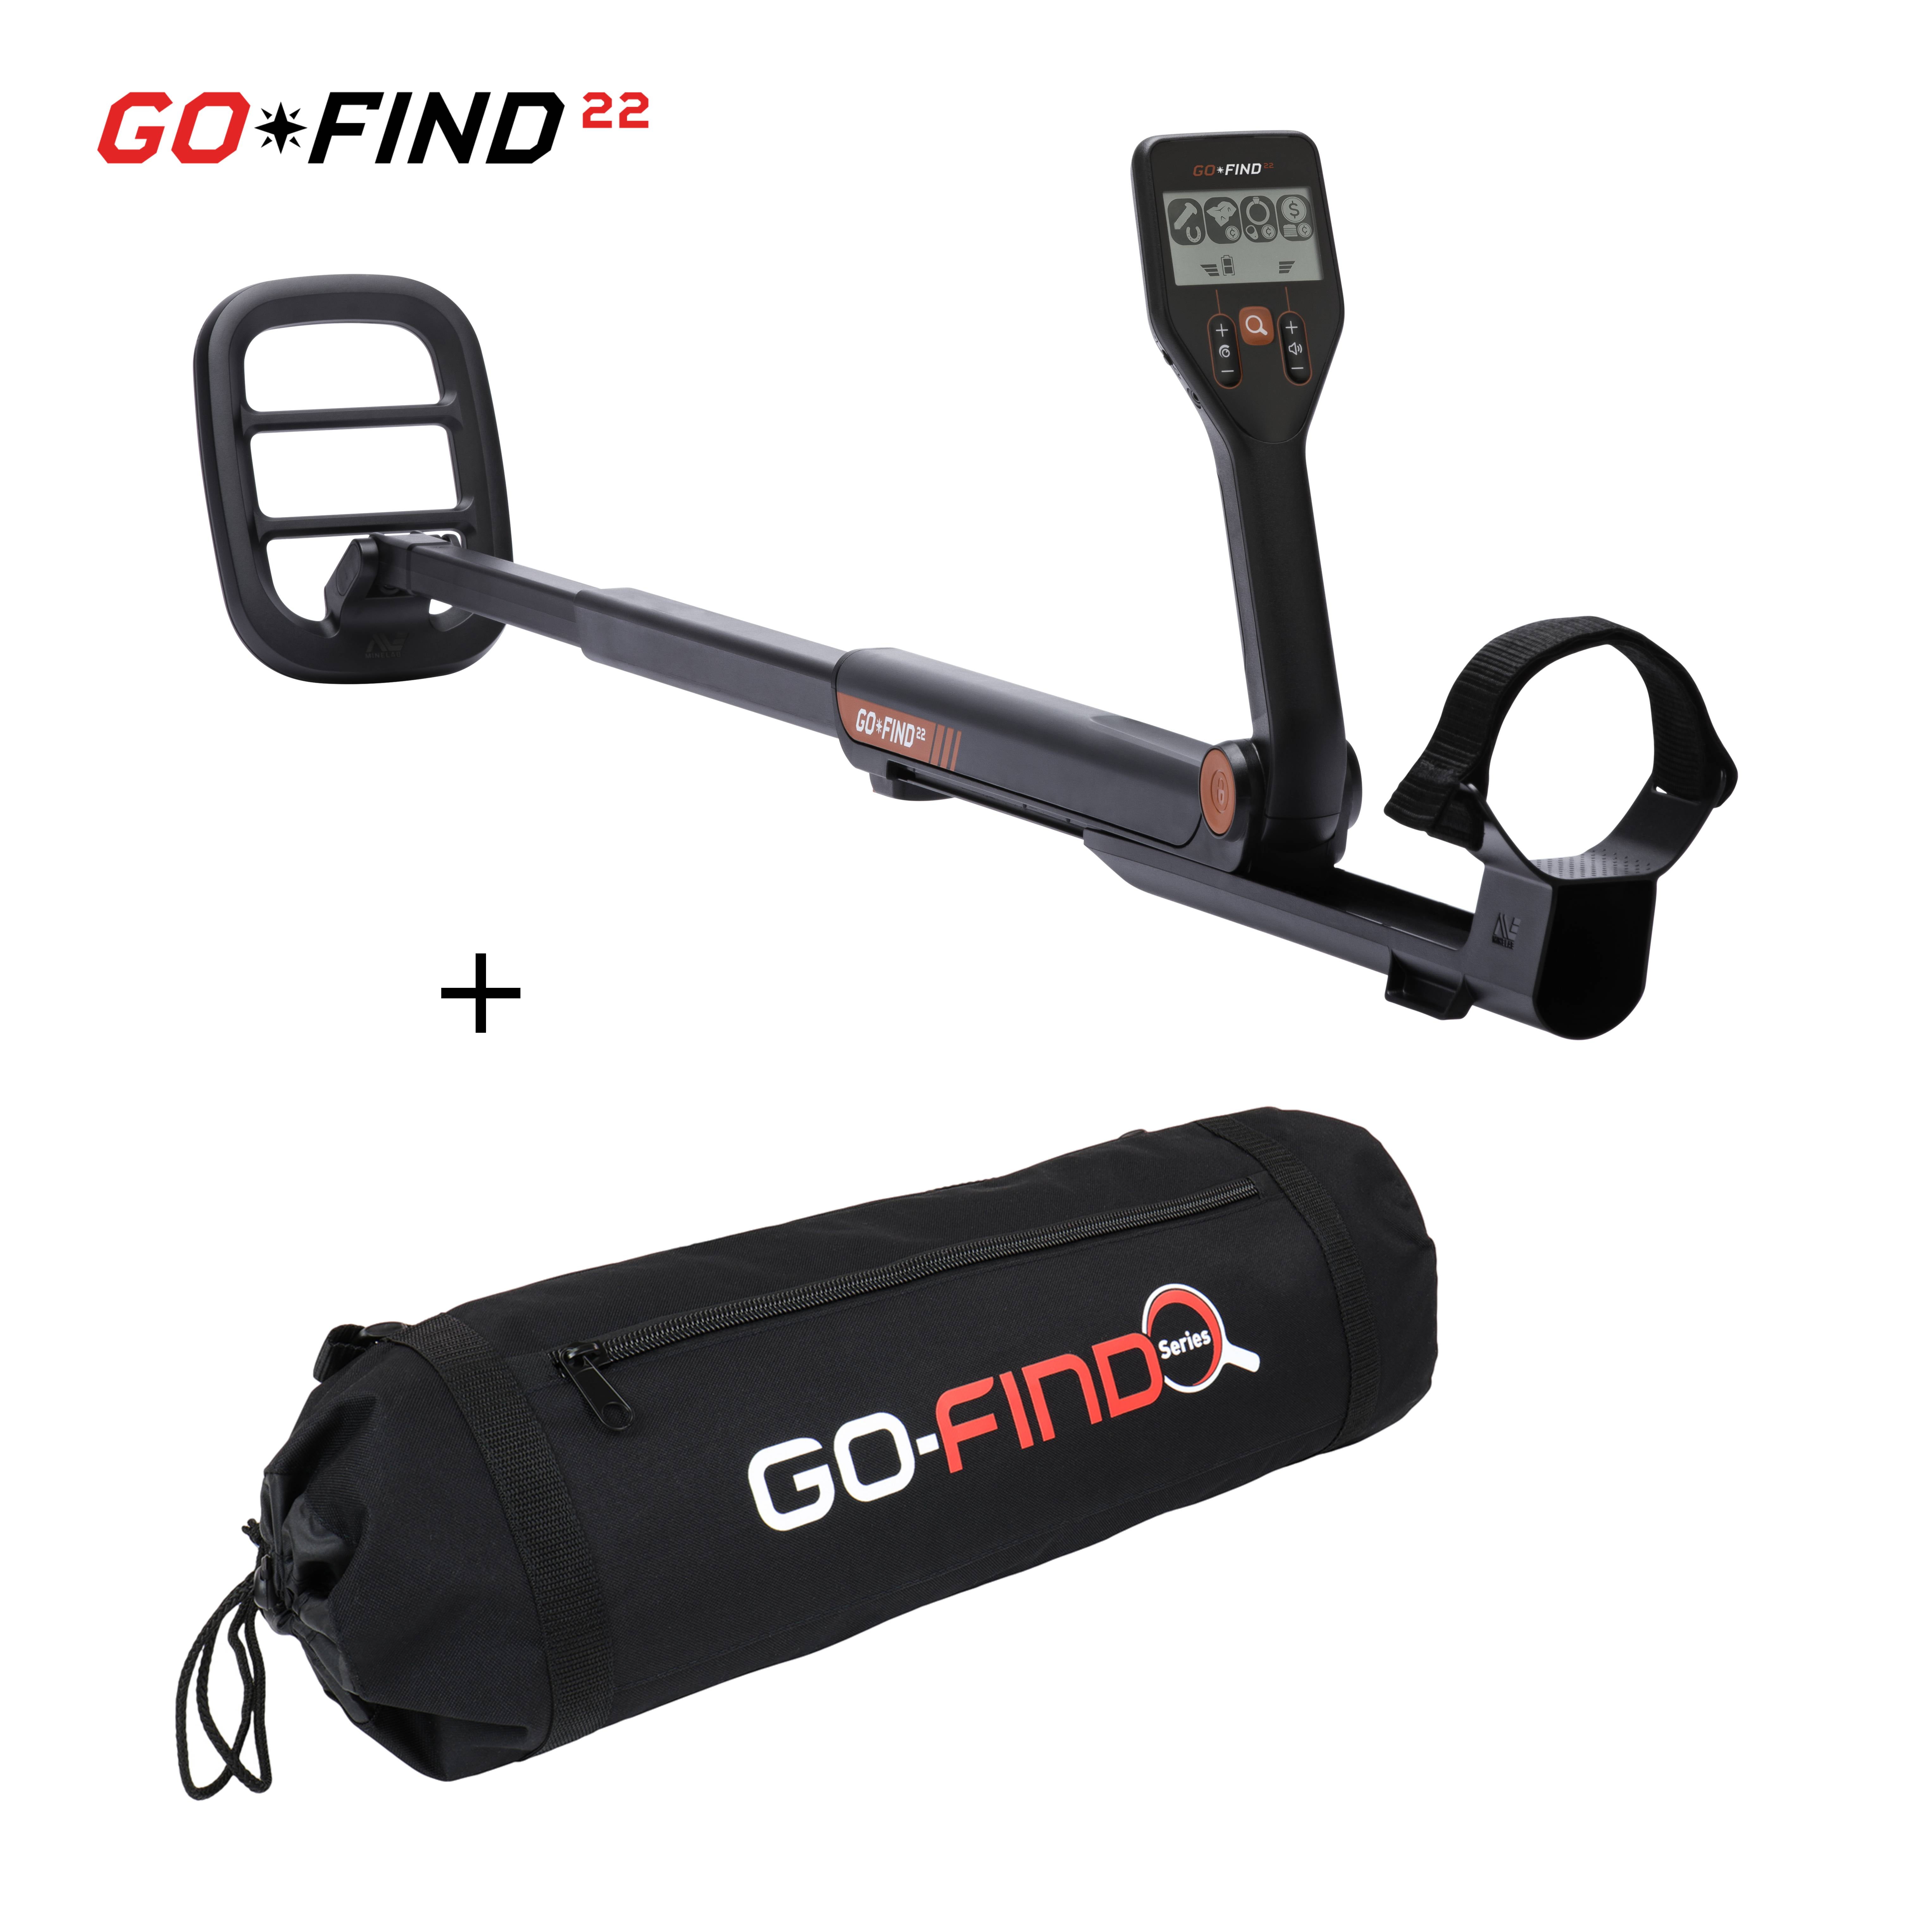 Minelab GO-FIND 22 Compact  Ultra Lightweight Metal Detector with 8